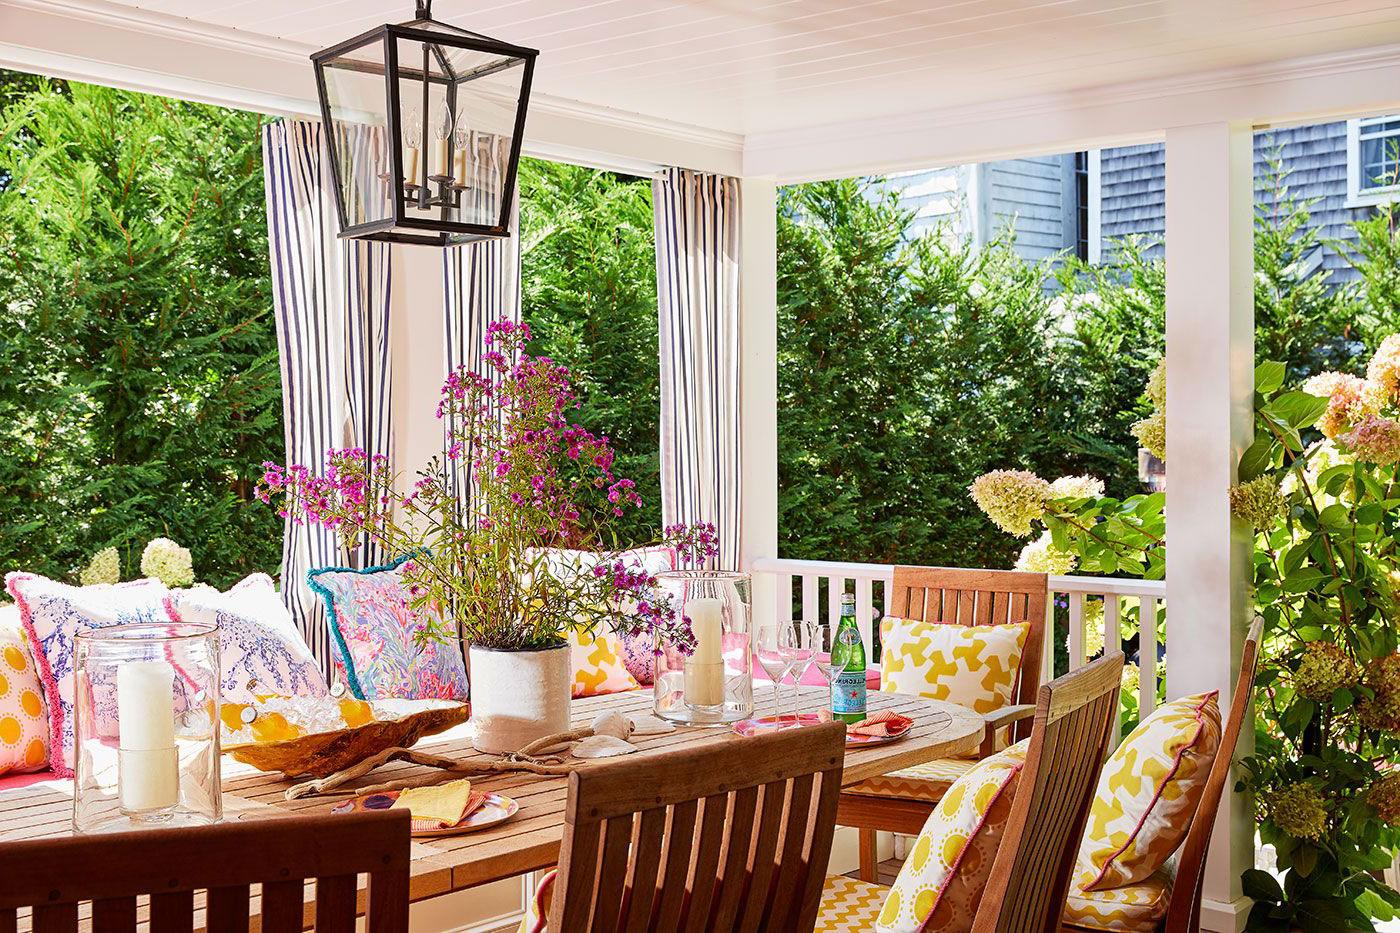 Porch with table and chairs surrounded by lush plantings